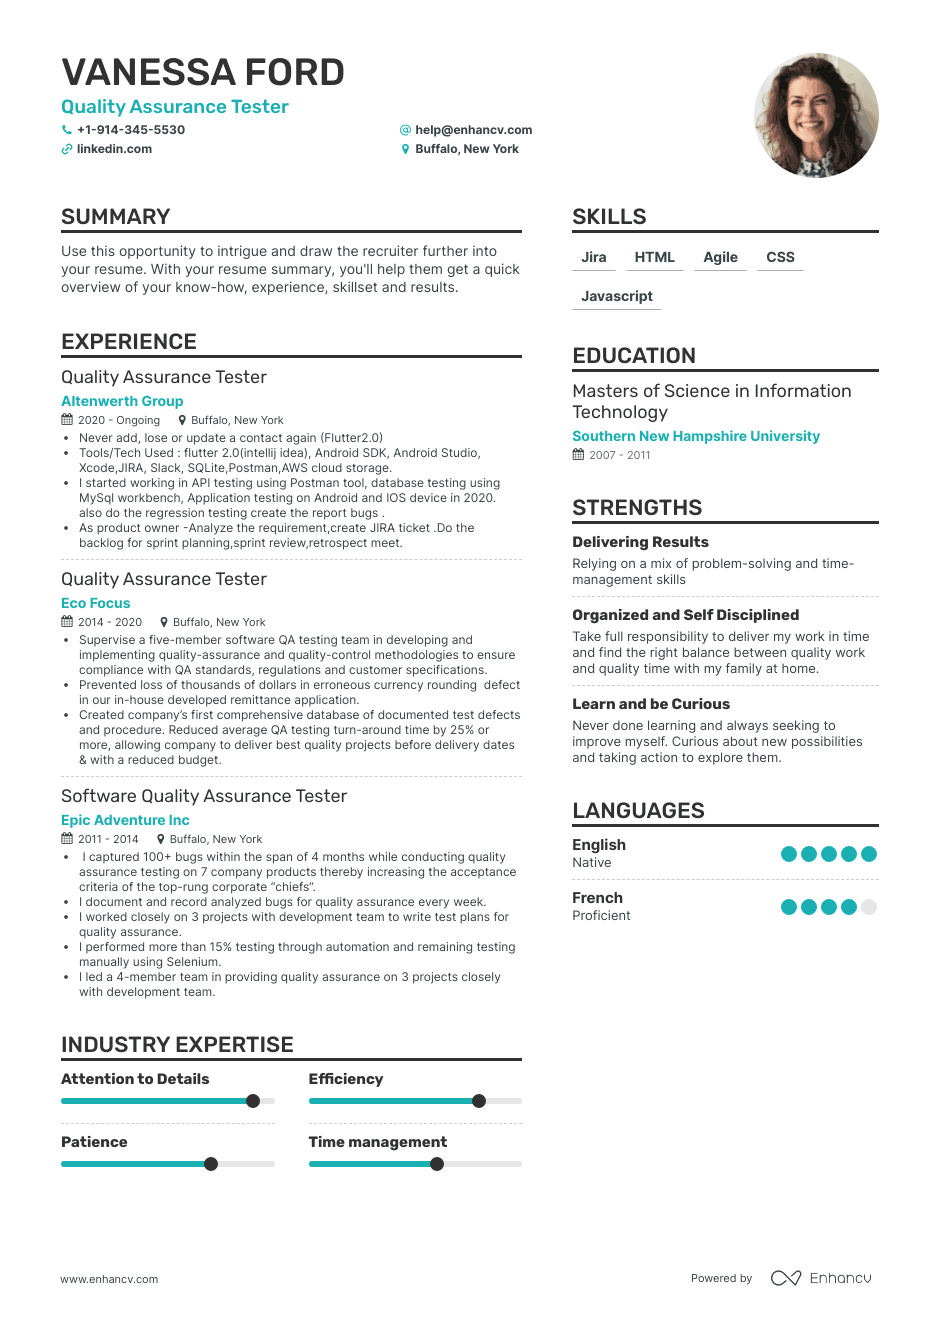 Quality Assurance Tester resume example